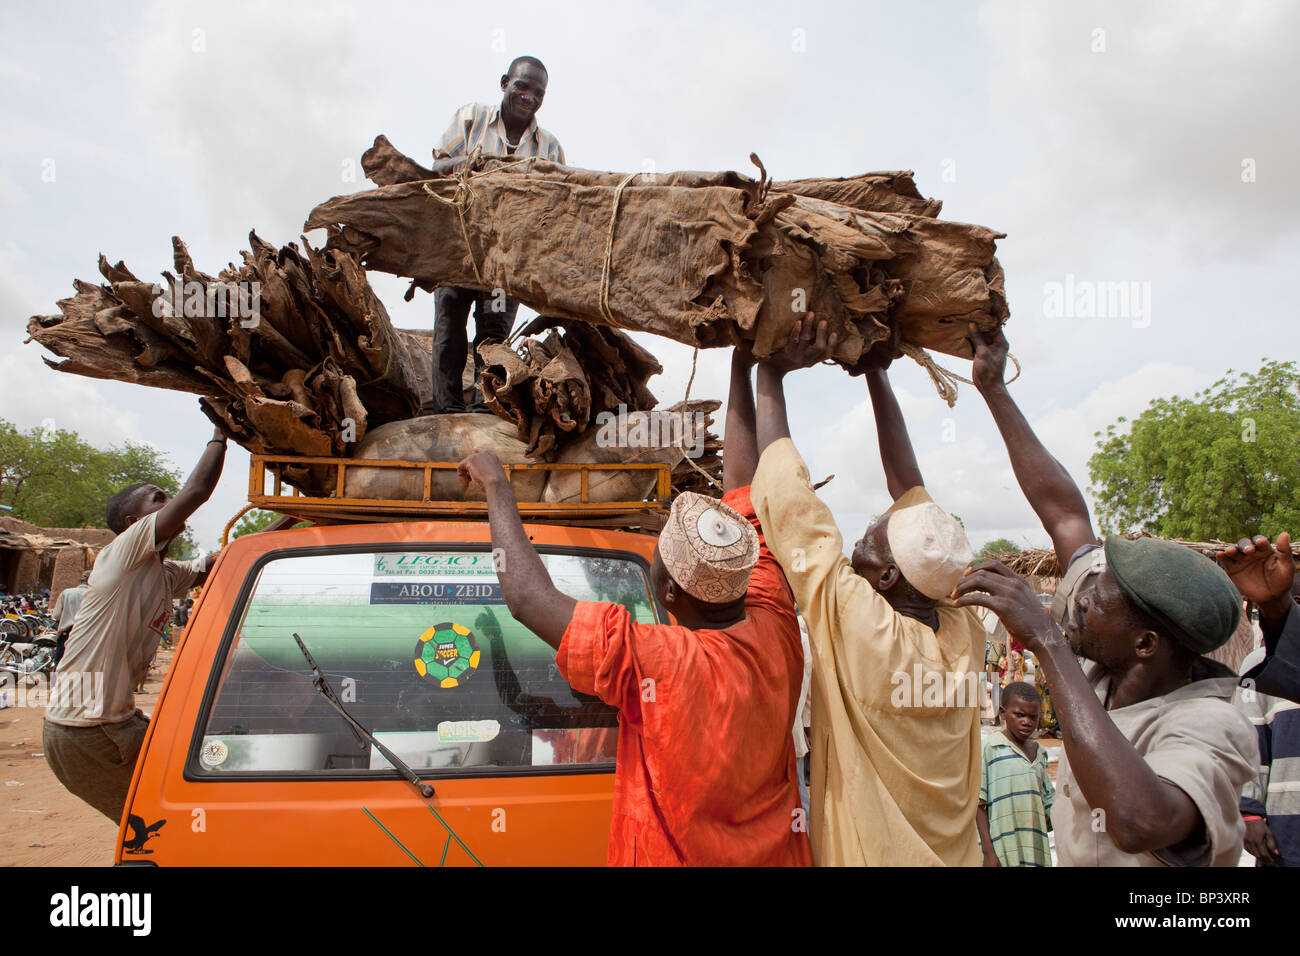 Animal skins are loaded onto a van which the Igbo and Yorubu tribes chew for protein when food supplies are scarce. Stock Photo